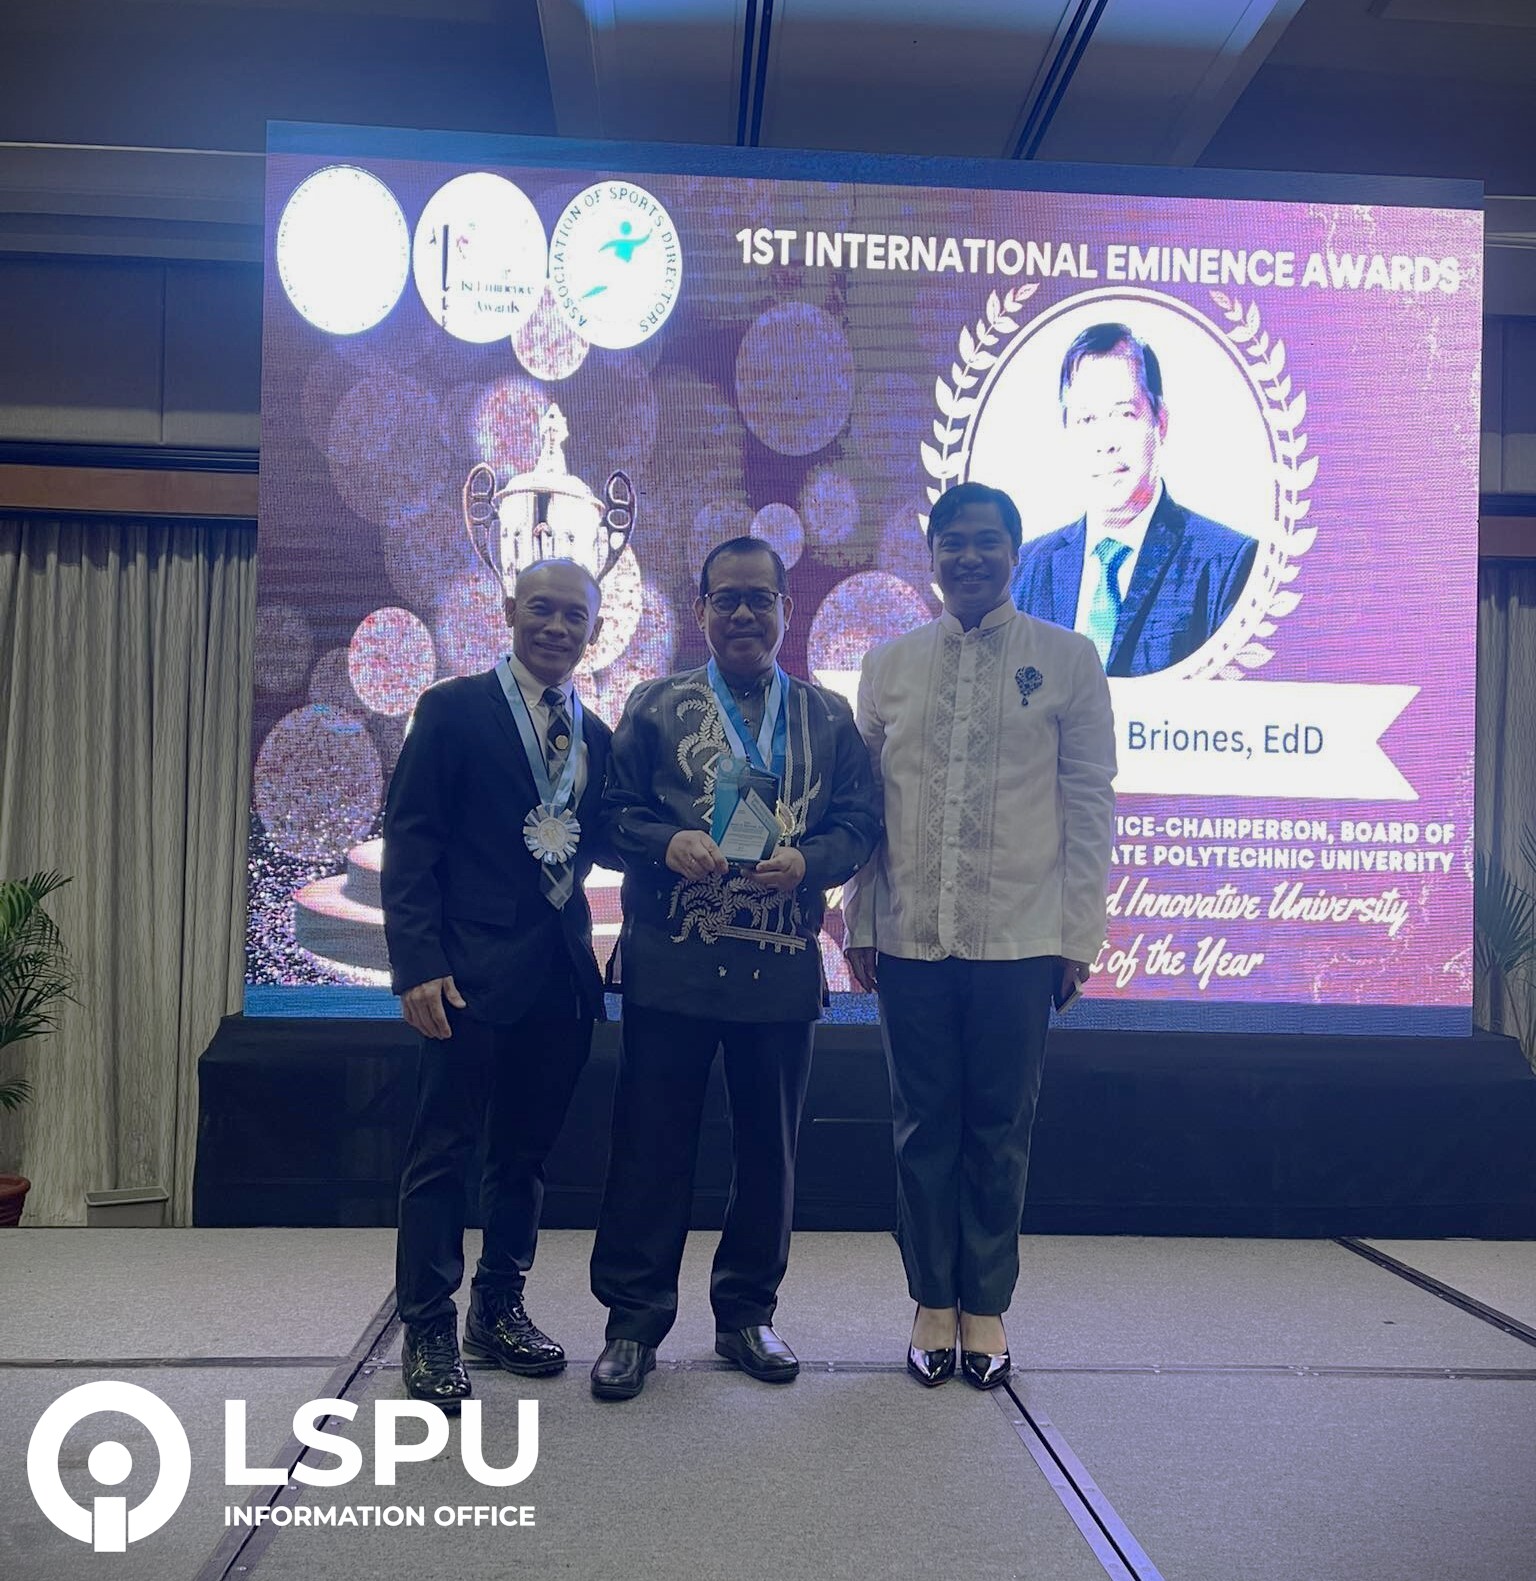 Pres Briones is IAPES Most Outstanding and Innovative University President of the Year